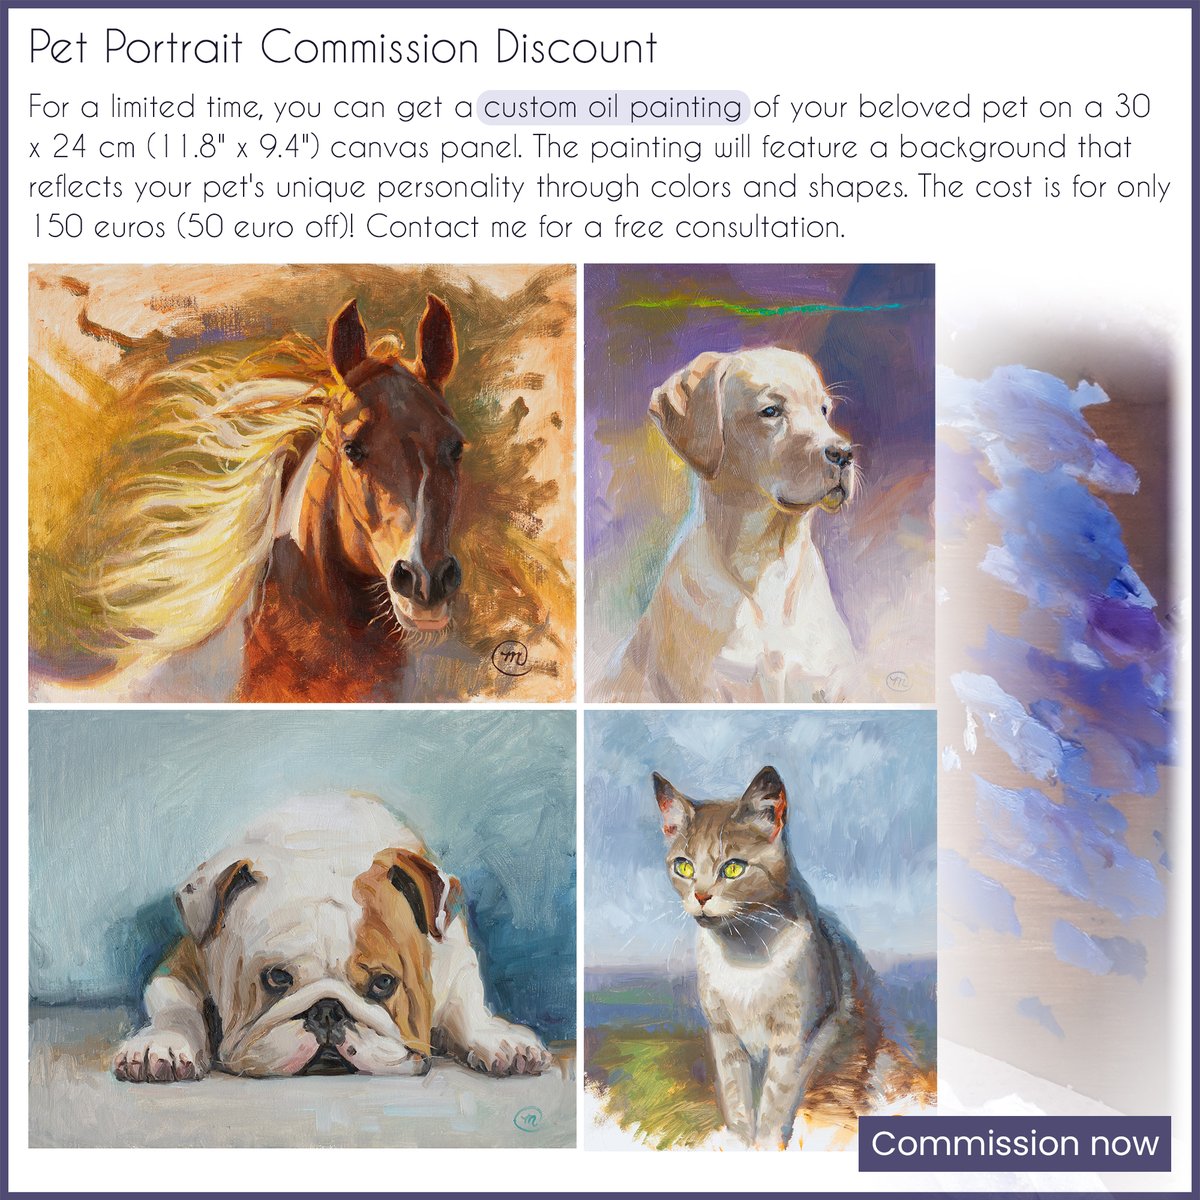 Pet Portrait Commission Discount

For a limited time, you can get a custom oil painting of your beloved pet on a 30 x 24 cm (11.8' x 9.4') canvas panel. Contact me for a free consultation.

For more info, check my comment below. 👇
#artcommission #petportrait #oilpainting